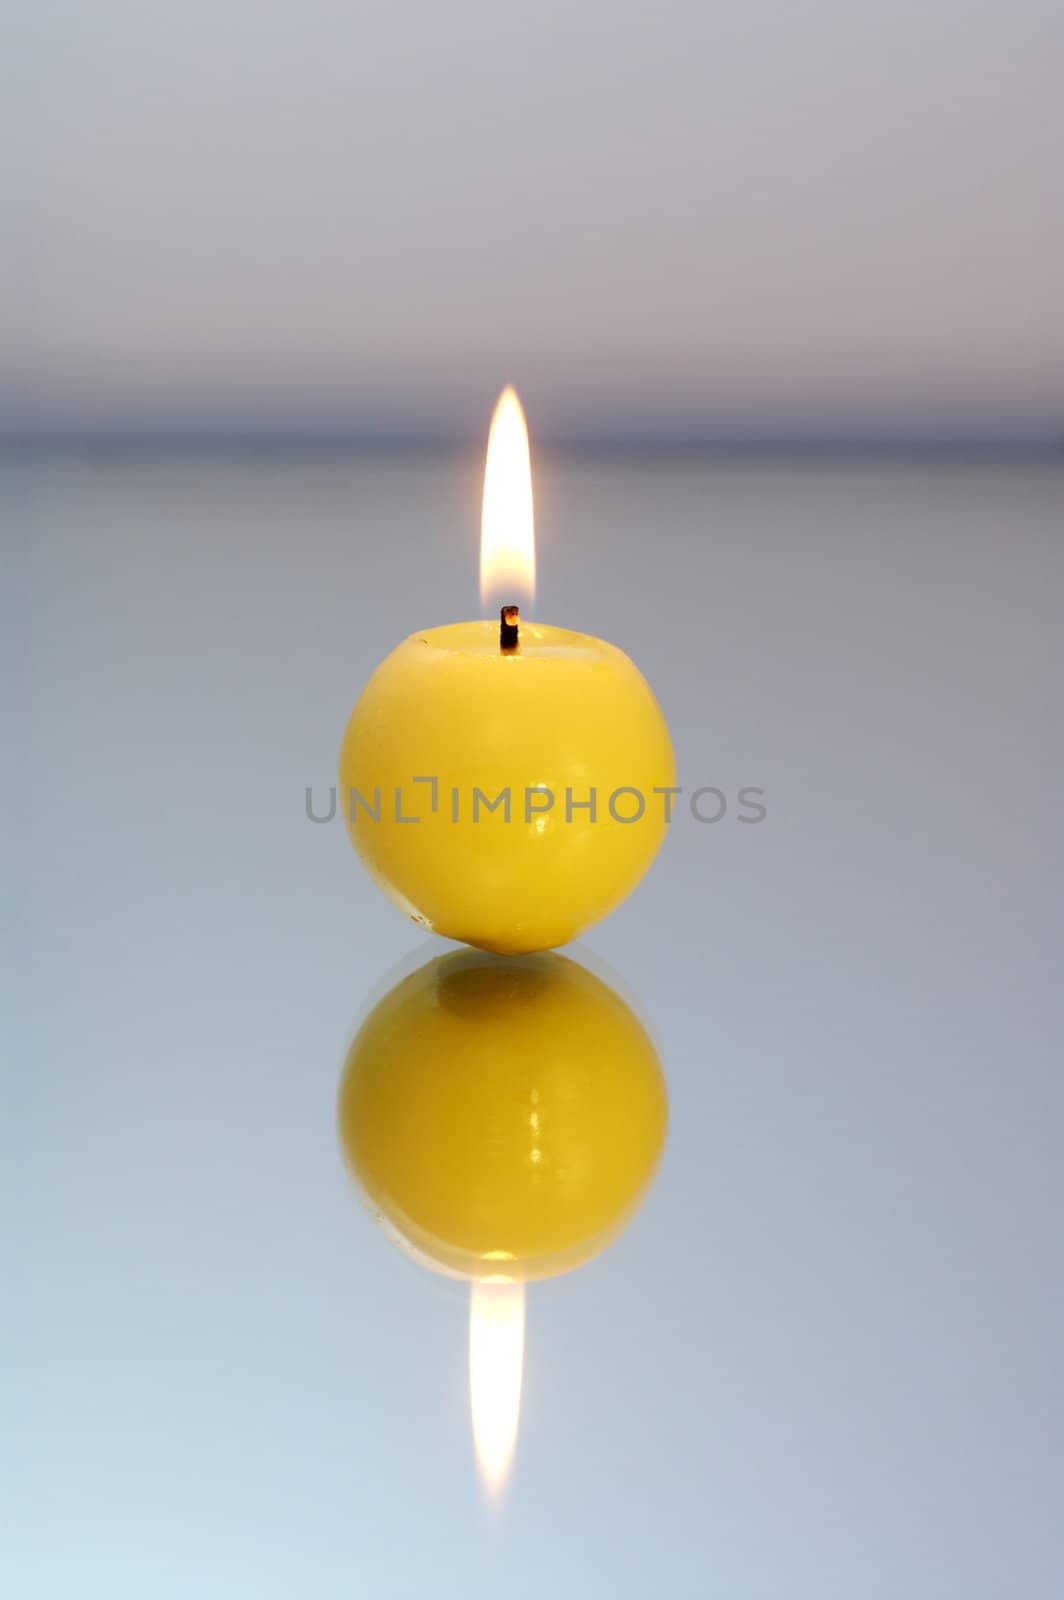 Round yellow candle burning on a reflective surface.